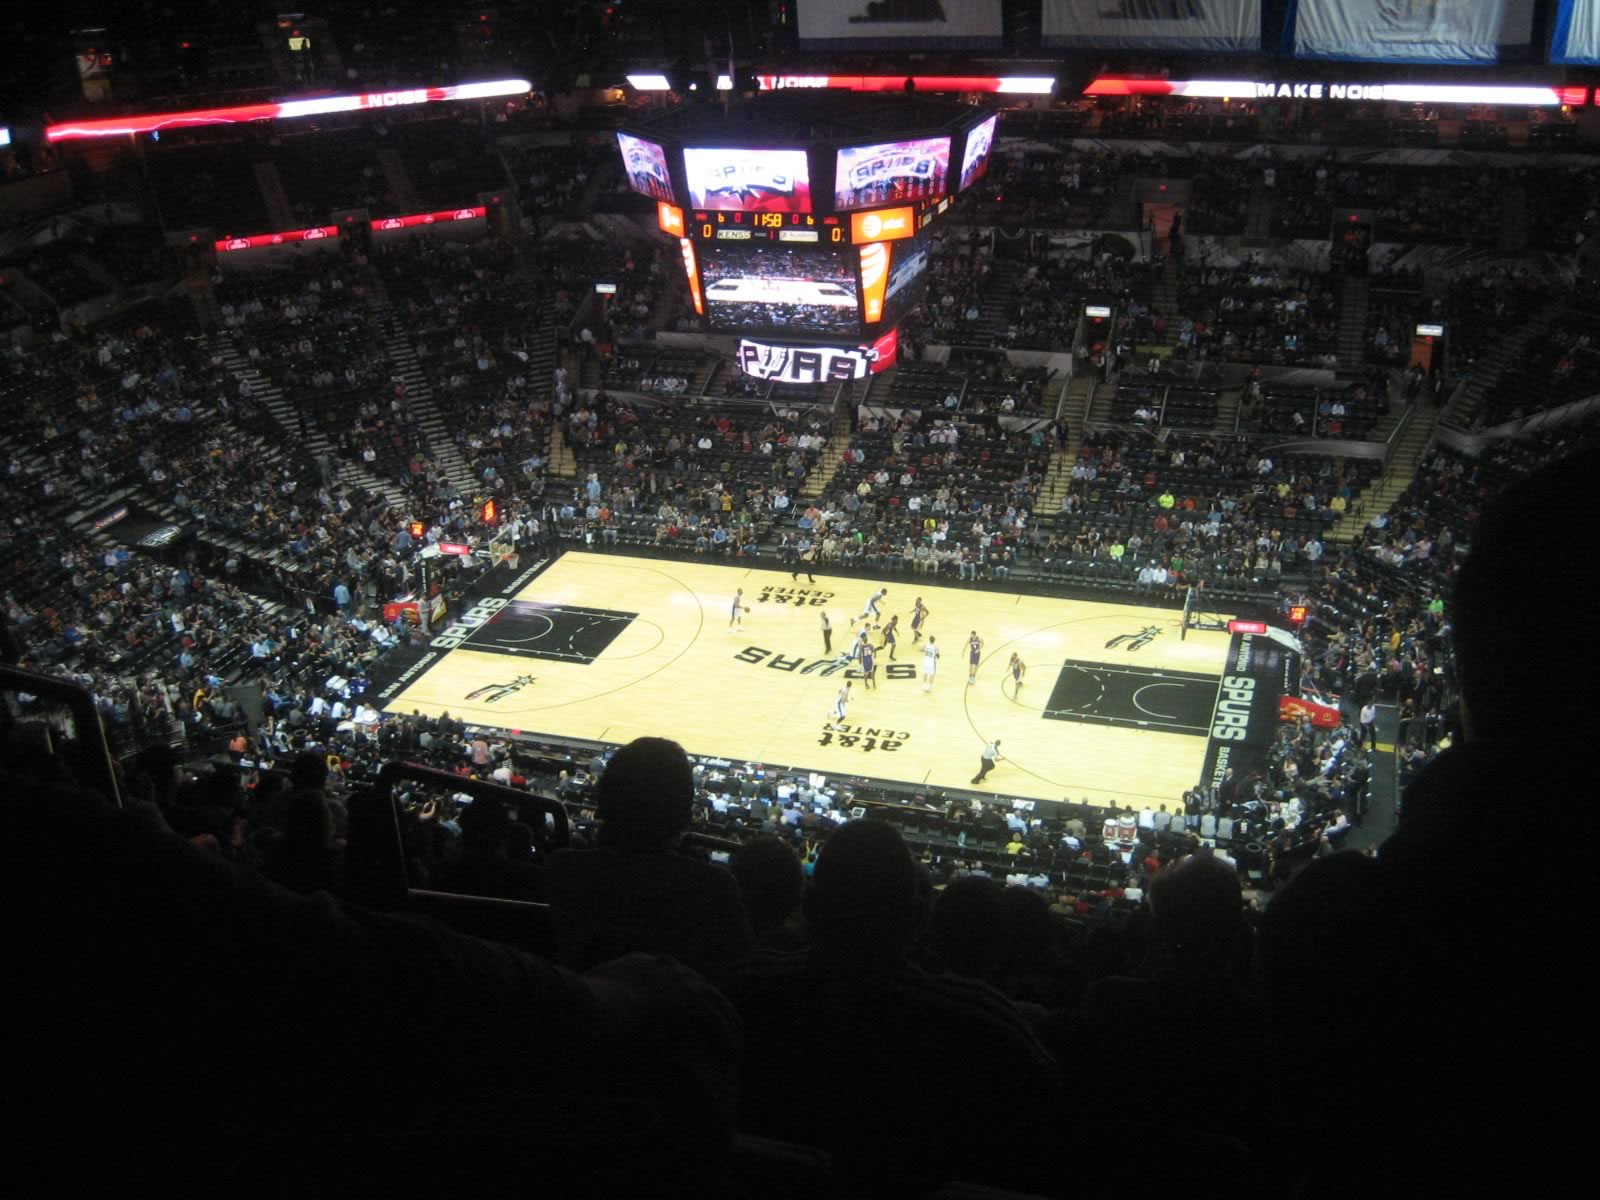 section 206, row 18 seat view  for basketball - at&t center